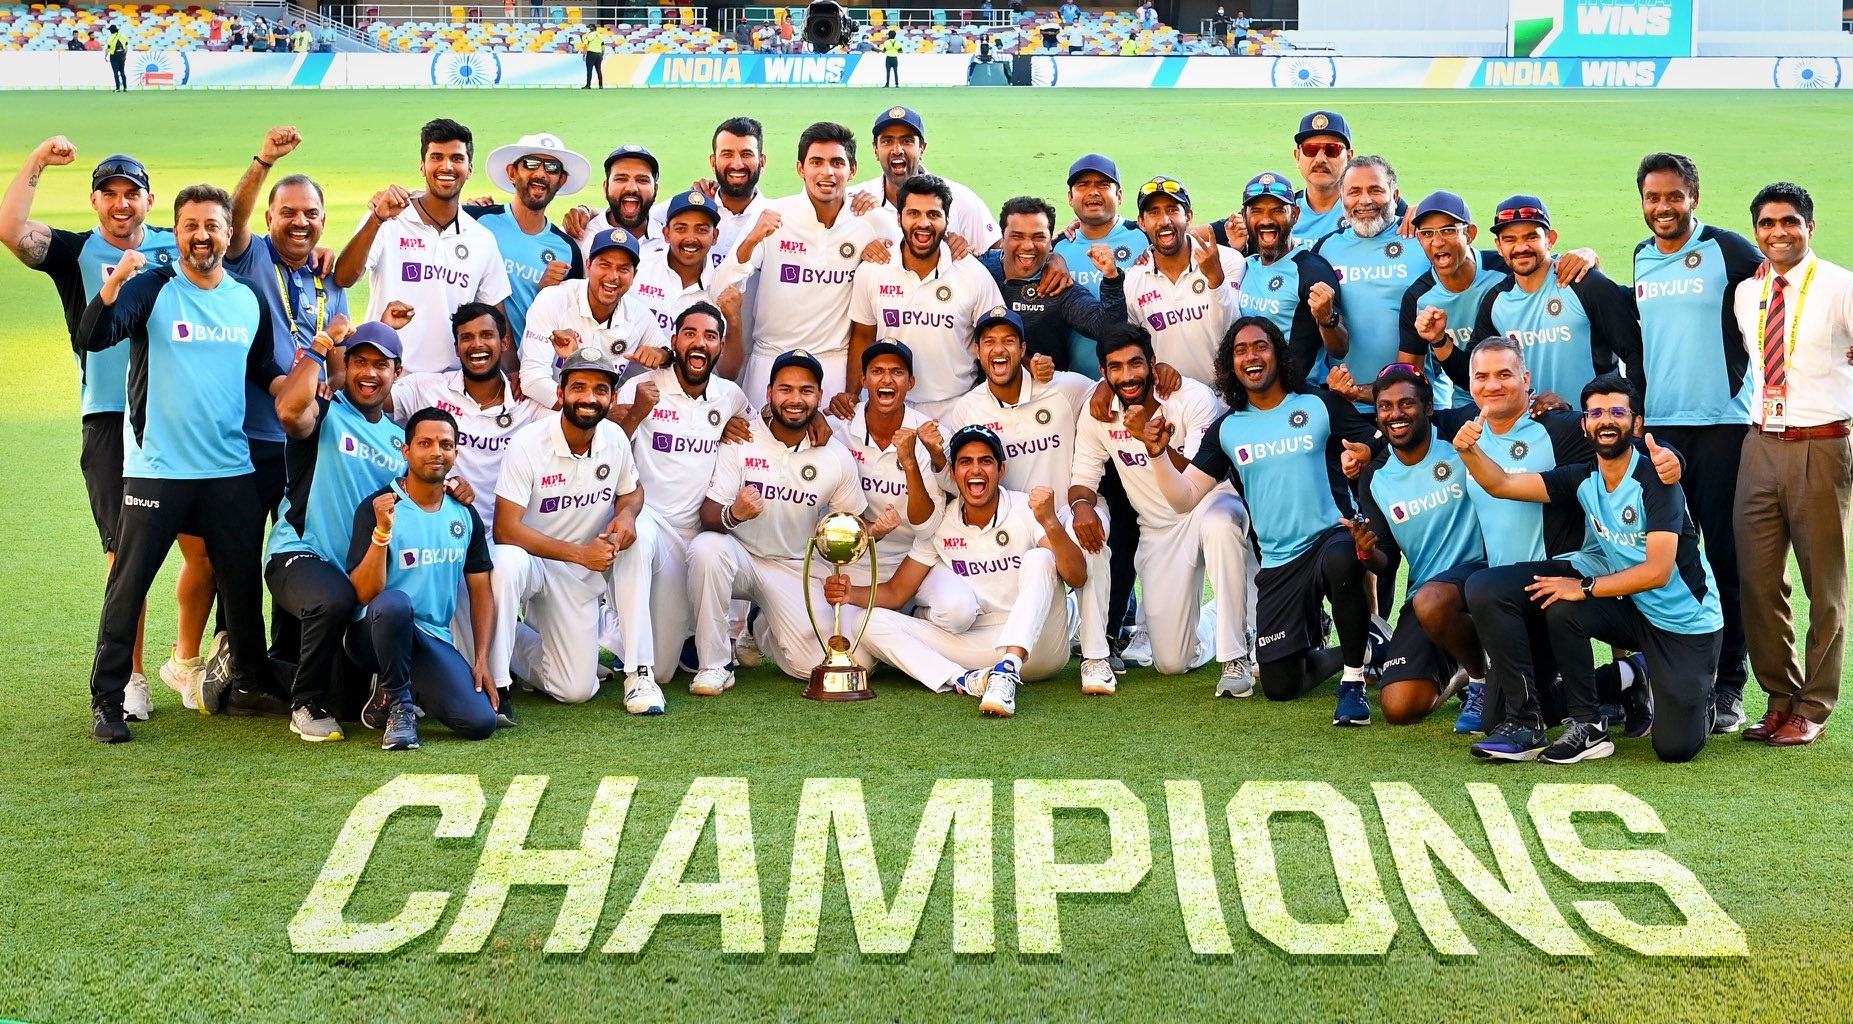 Indian team poses with the trophy at The Gabba | BCCI Twitter